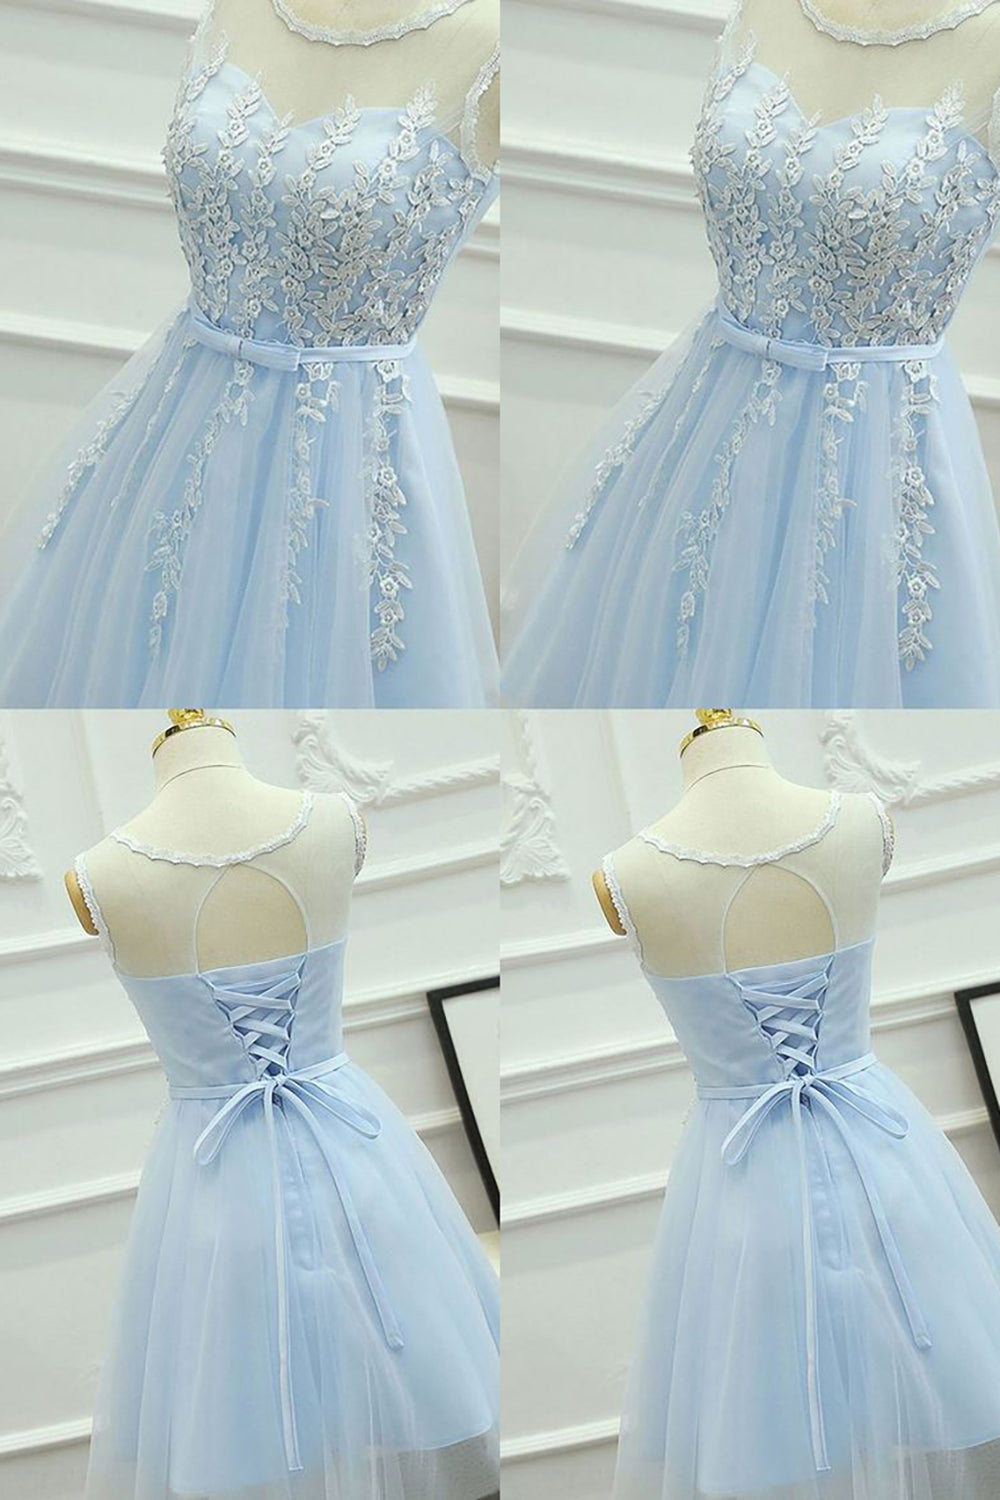 Homecoming Dresses Formal, Blue Round Neck A Line Homecoming Dress